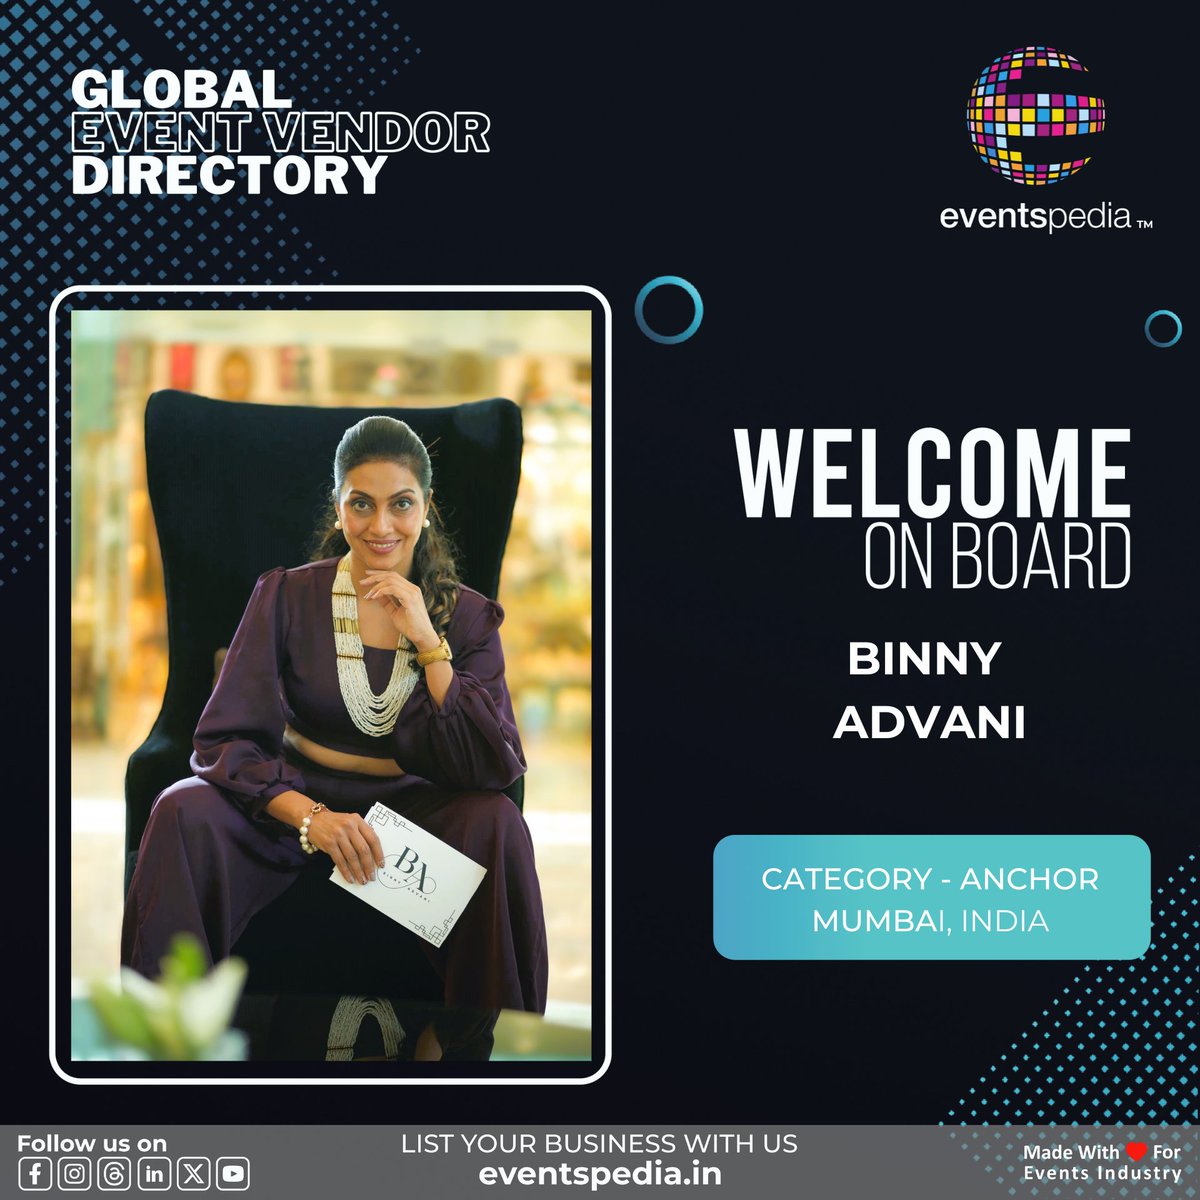 Binny Advani is a seasoned Emcee & Presenter with over two decades of experience in TV, radio, and web hosting. She excels as a captivating emcee for corporate events & weddings

Click here: eventspedia.in/listing/emcee-…

#binnyadvani #emcee #anchor #mumbai #bestemcee #eventspediaindia